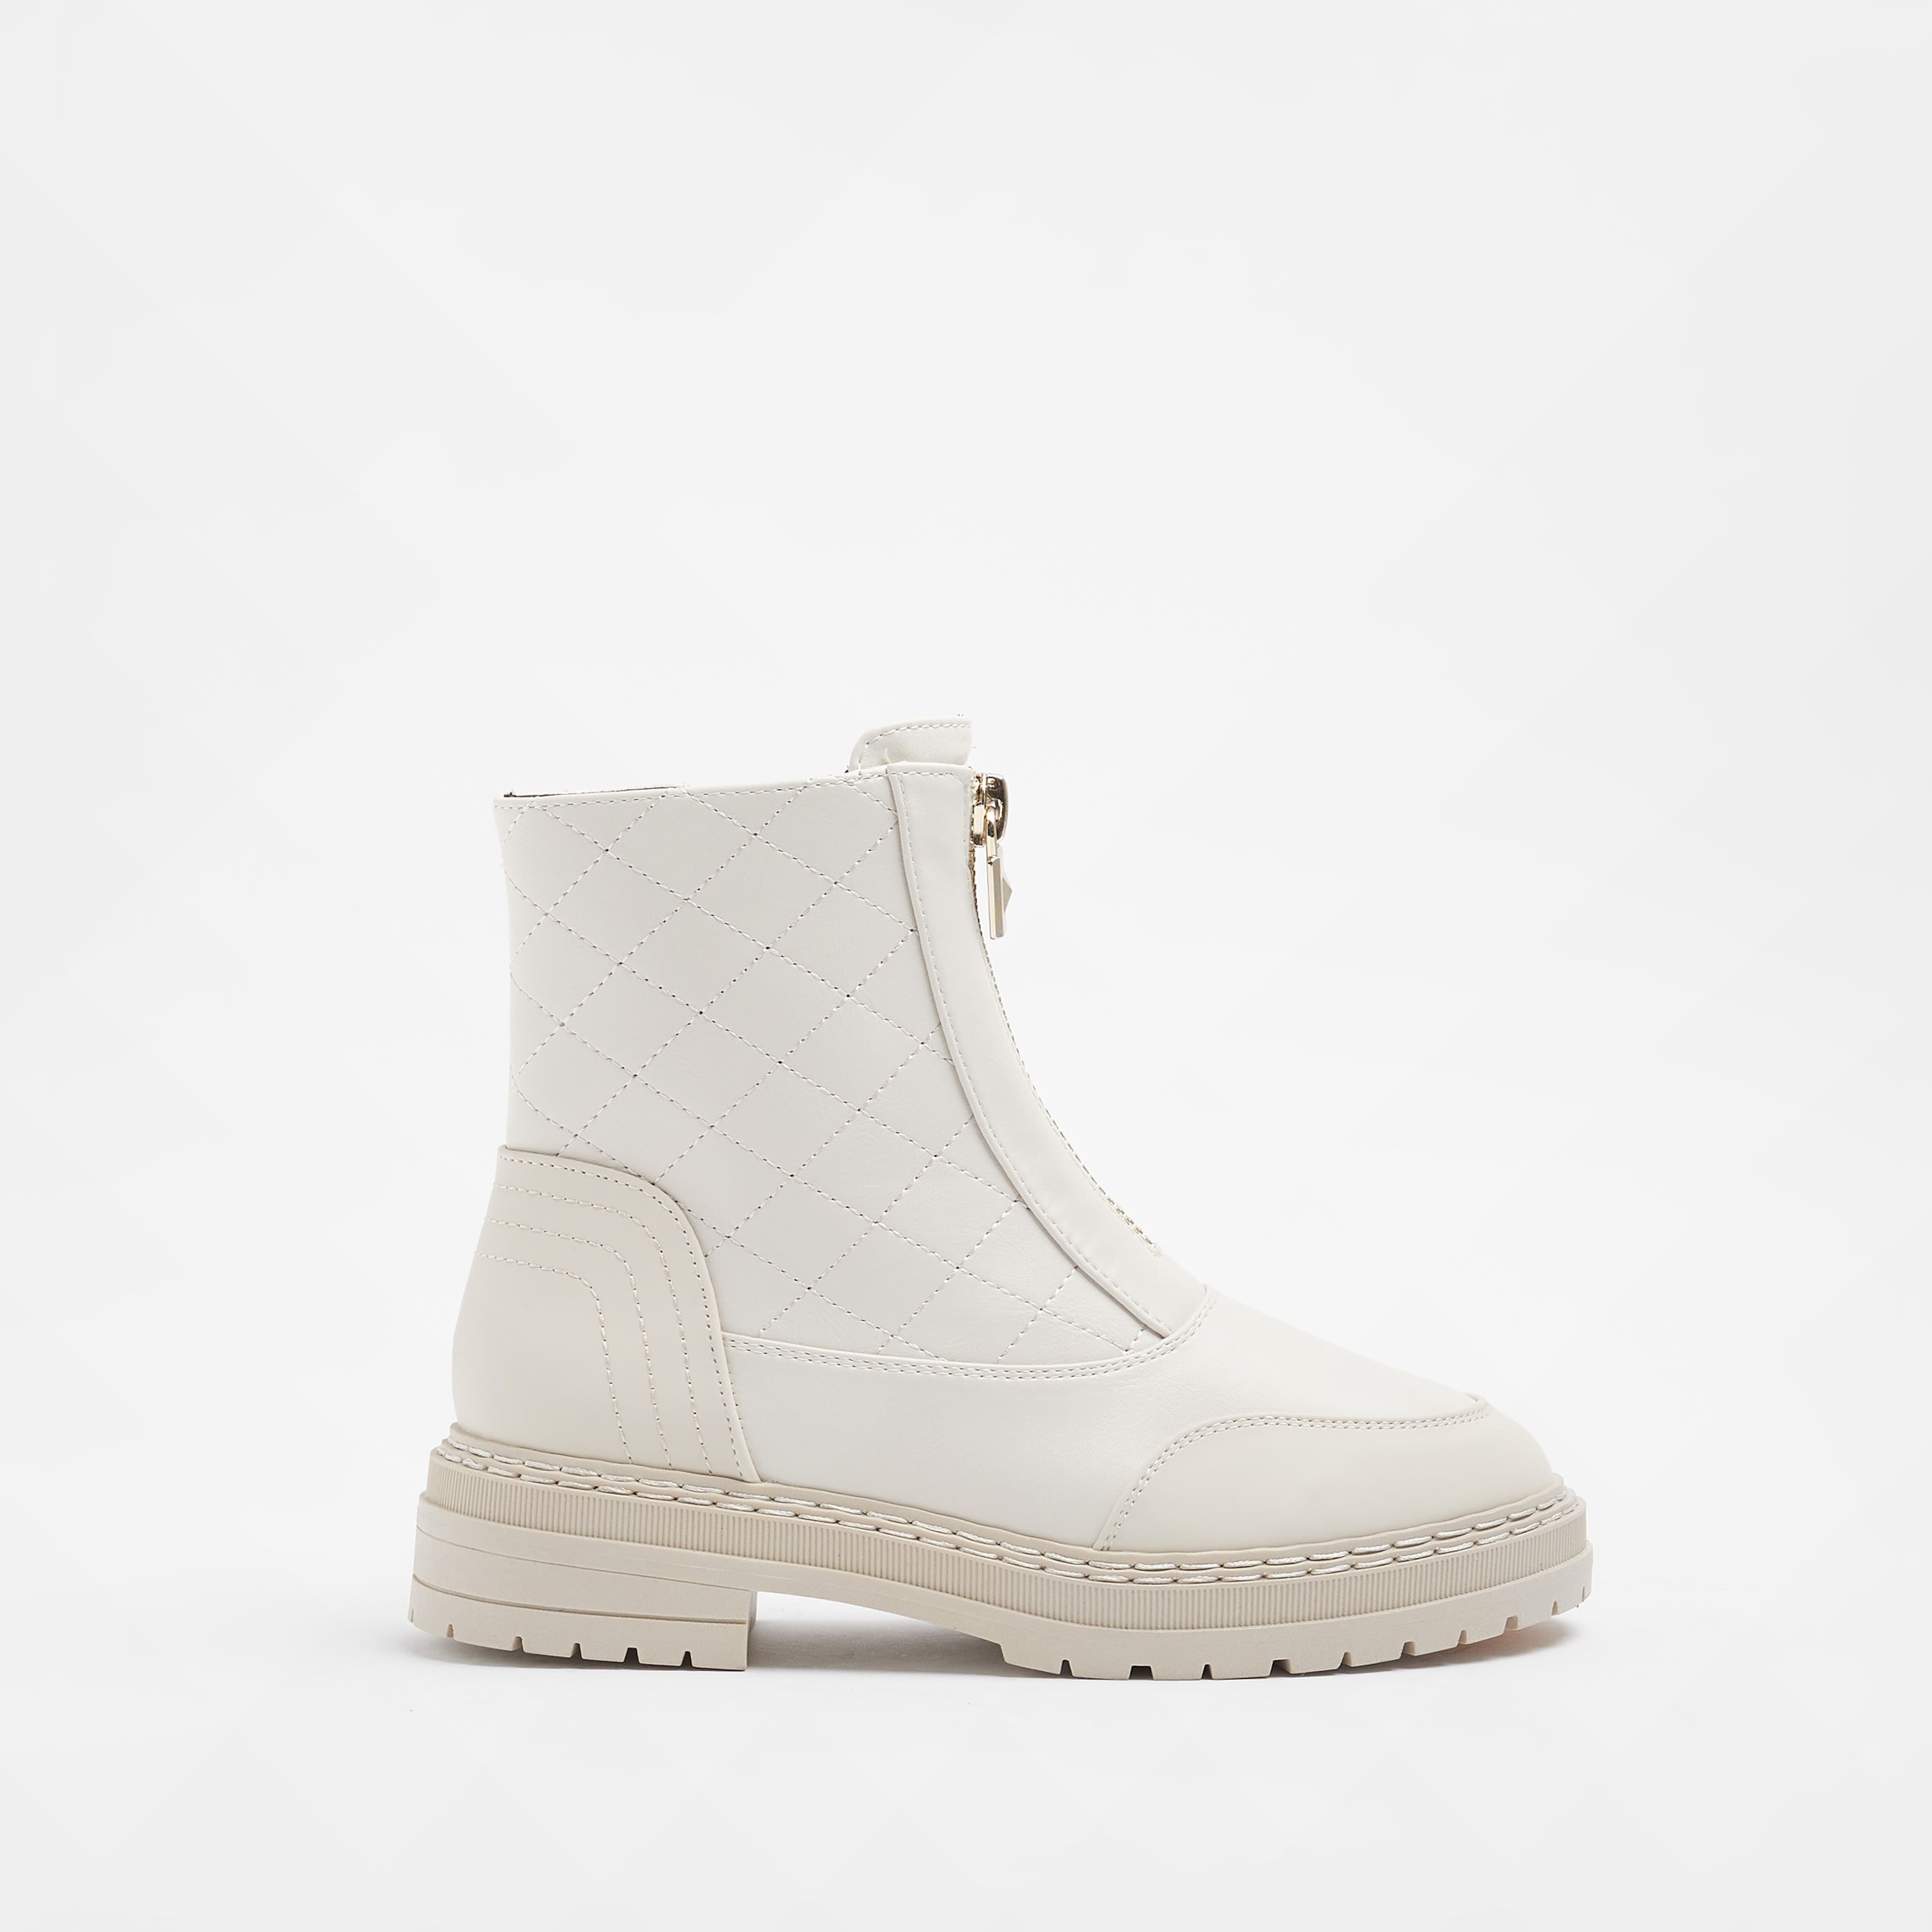 >Brand: River Island>Gender: Women>Type: Boot>Style: Bootie>Occasion: Casual>Pattern: Quilted>Closure: Zip>Fit: Wide>Shoe Width: Wide>Toe Shape: Round Toe>Heel Style: Flat